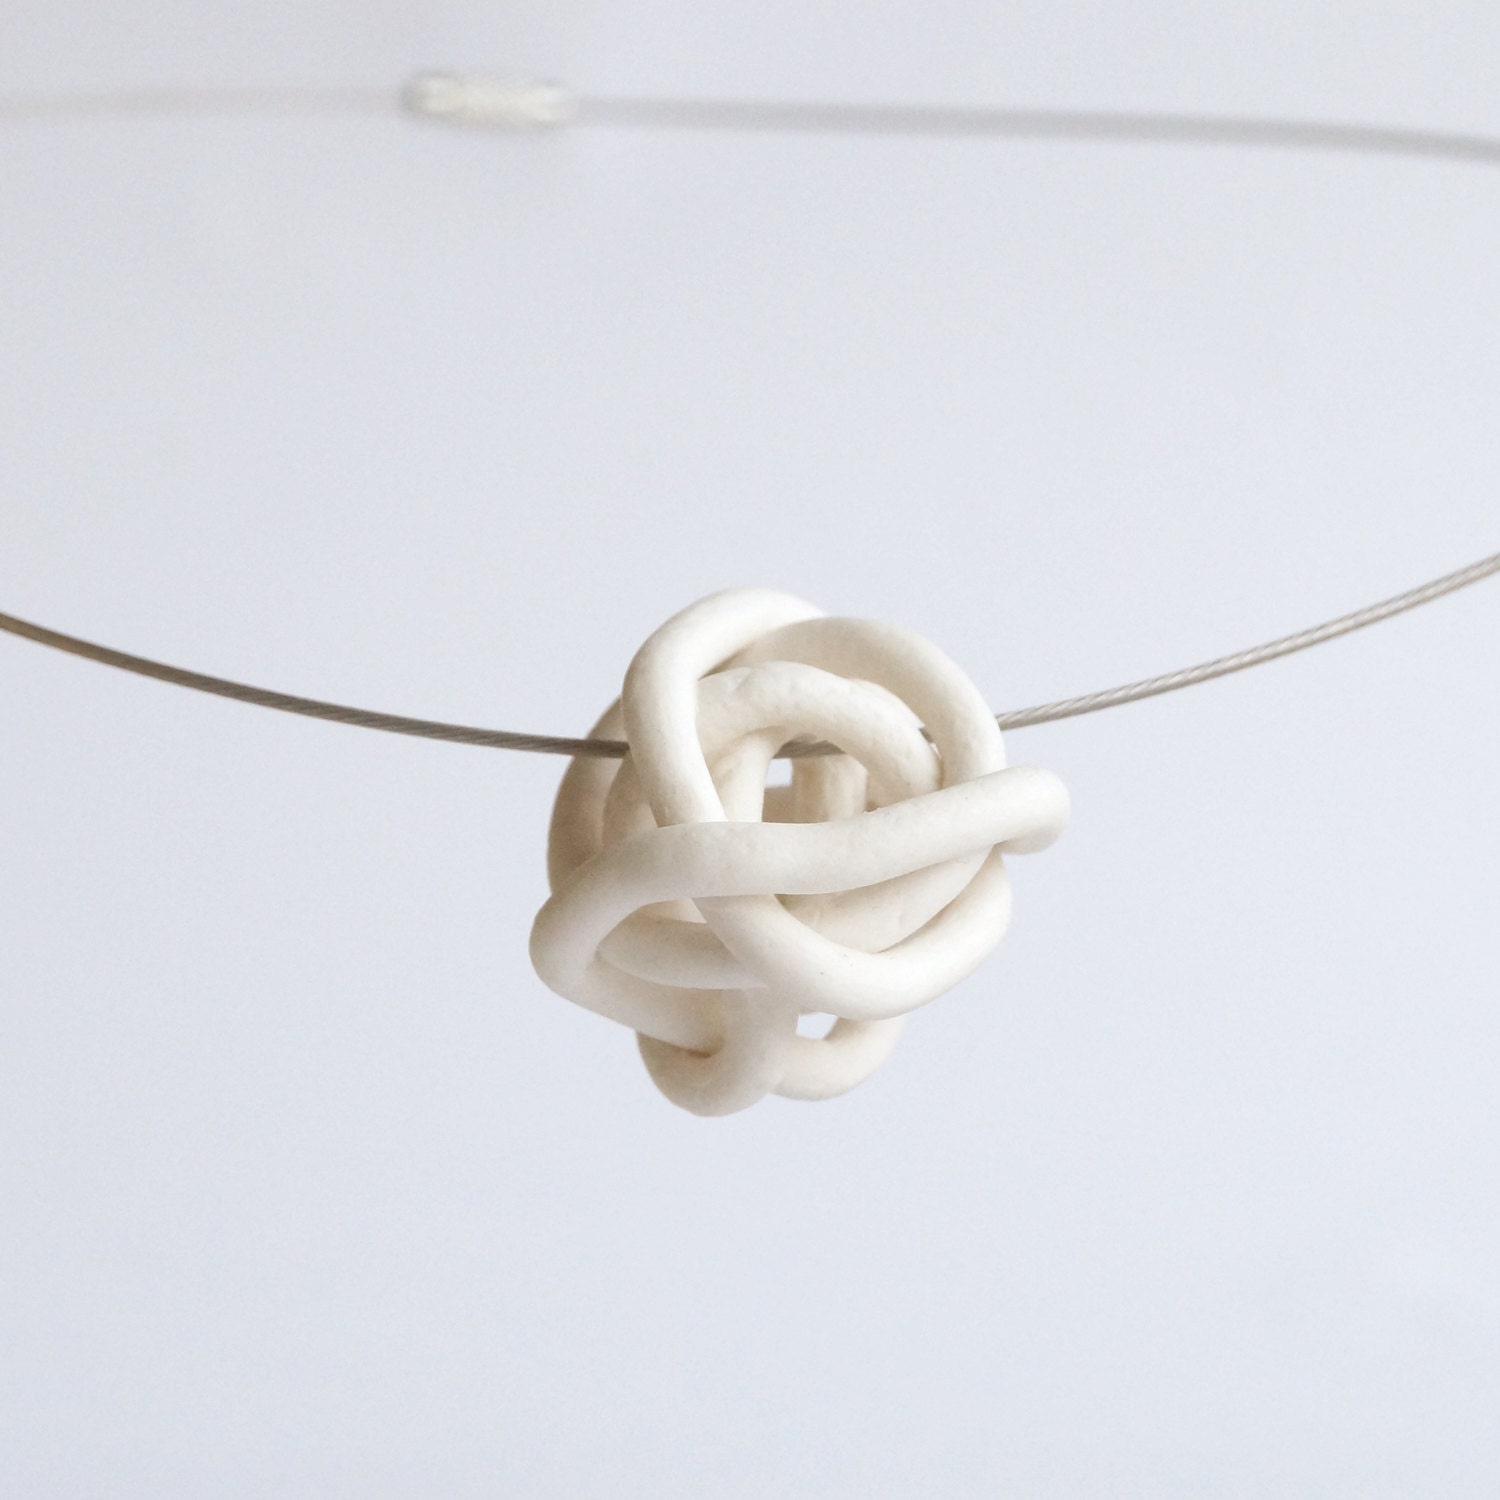 White porcelain open tangle bead orbits a circular necklace gift for her under 25 - VanillaKiln